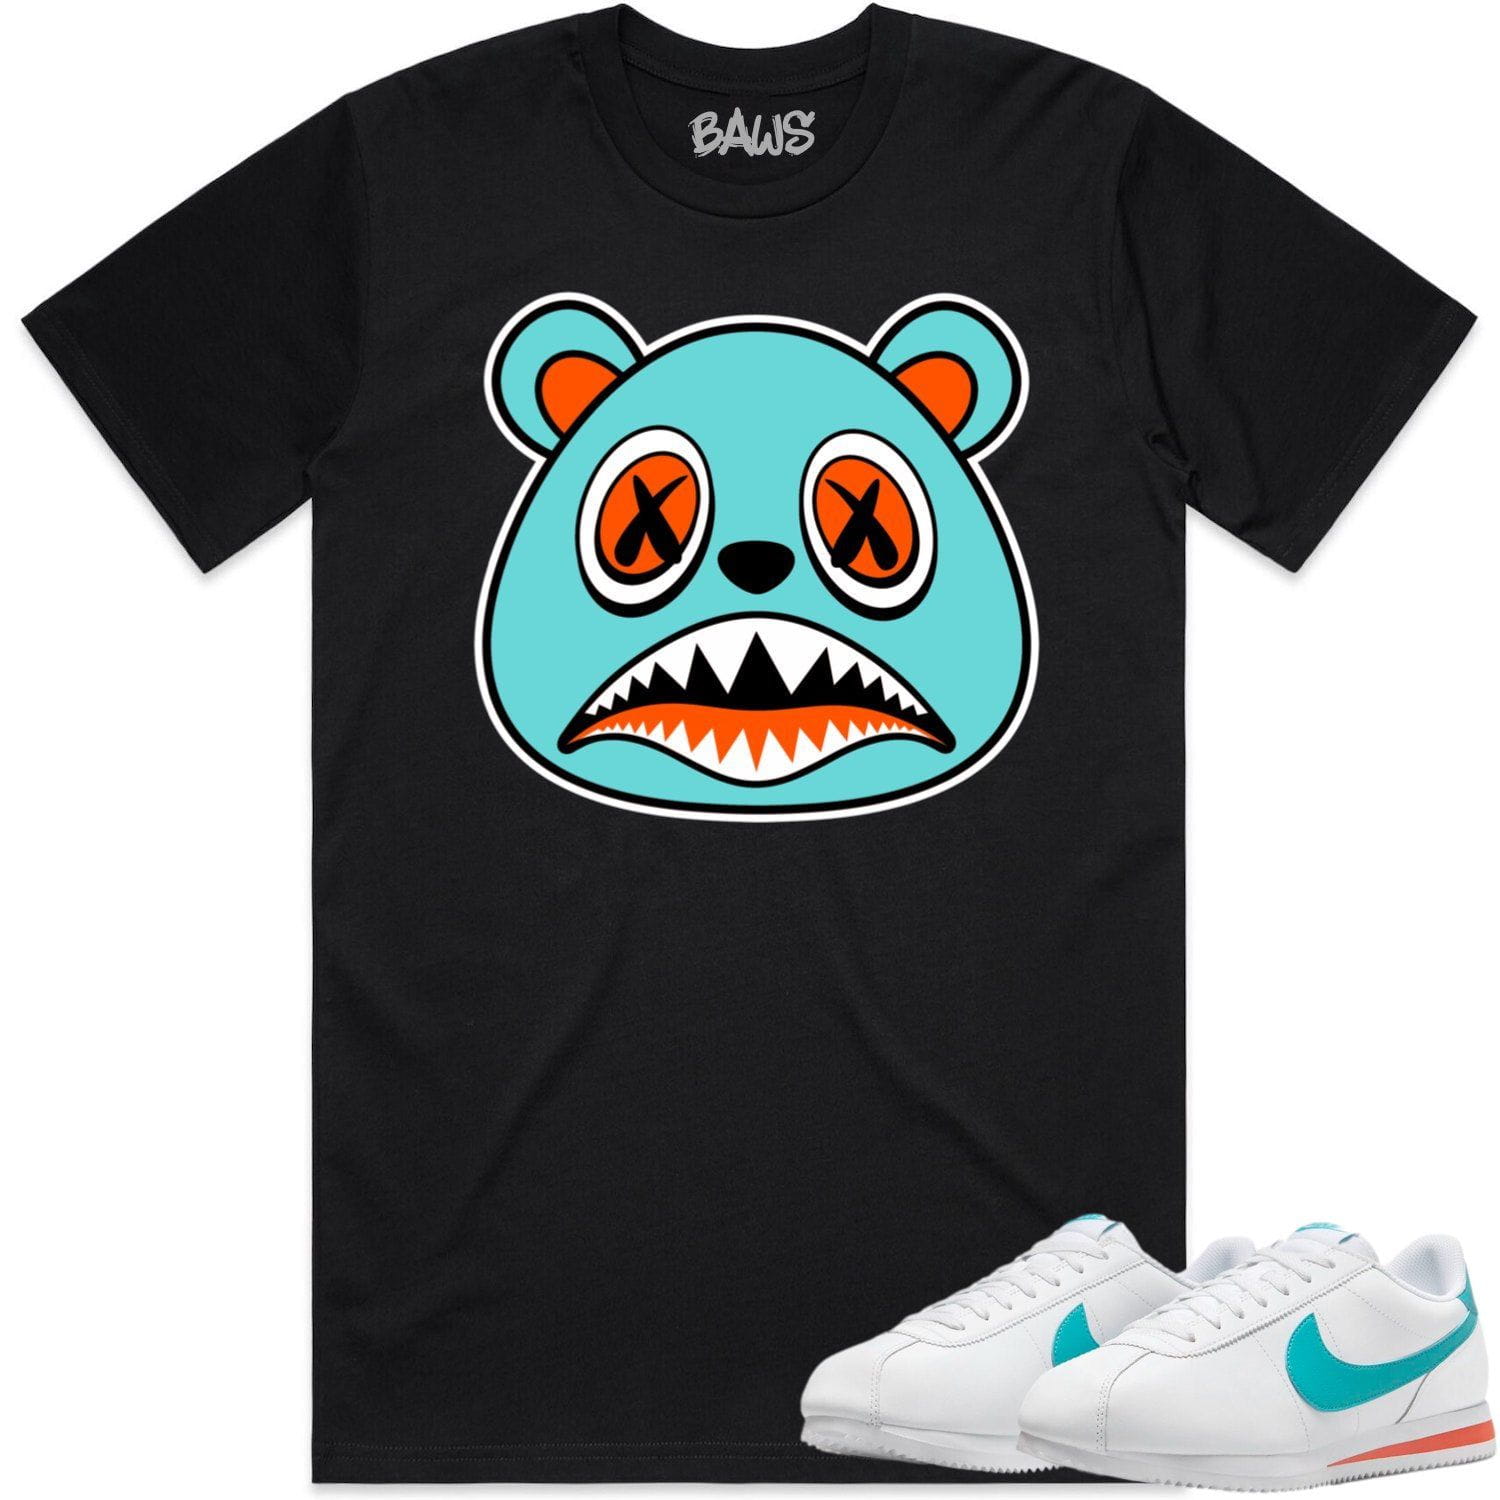 Miami Cortez Dolphins Shirt - Dolphins Sneaker Tees - Baws Bear